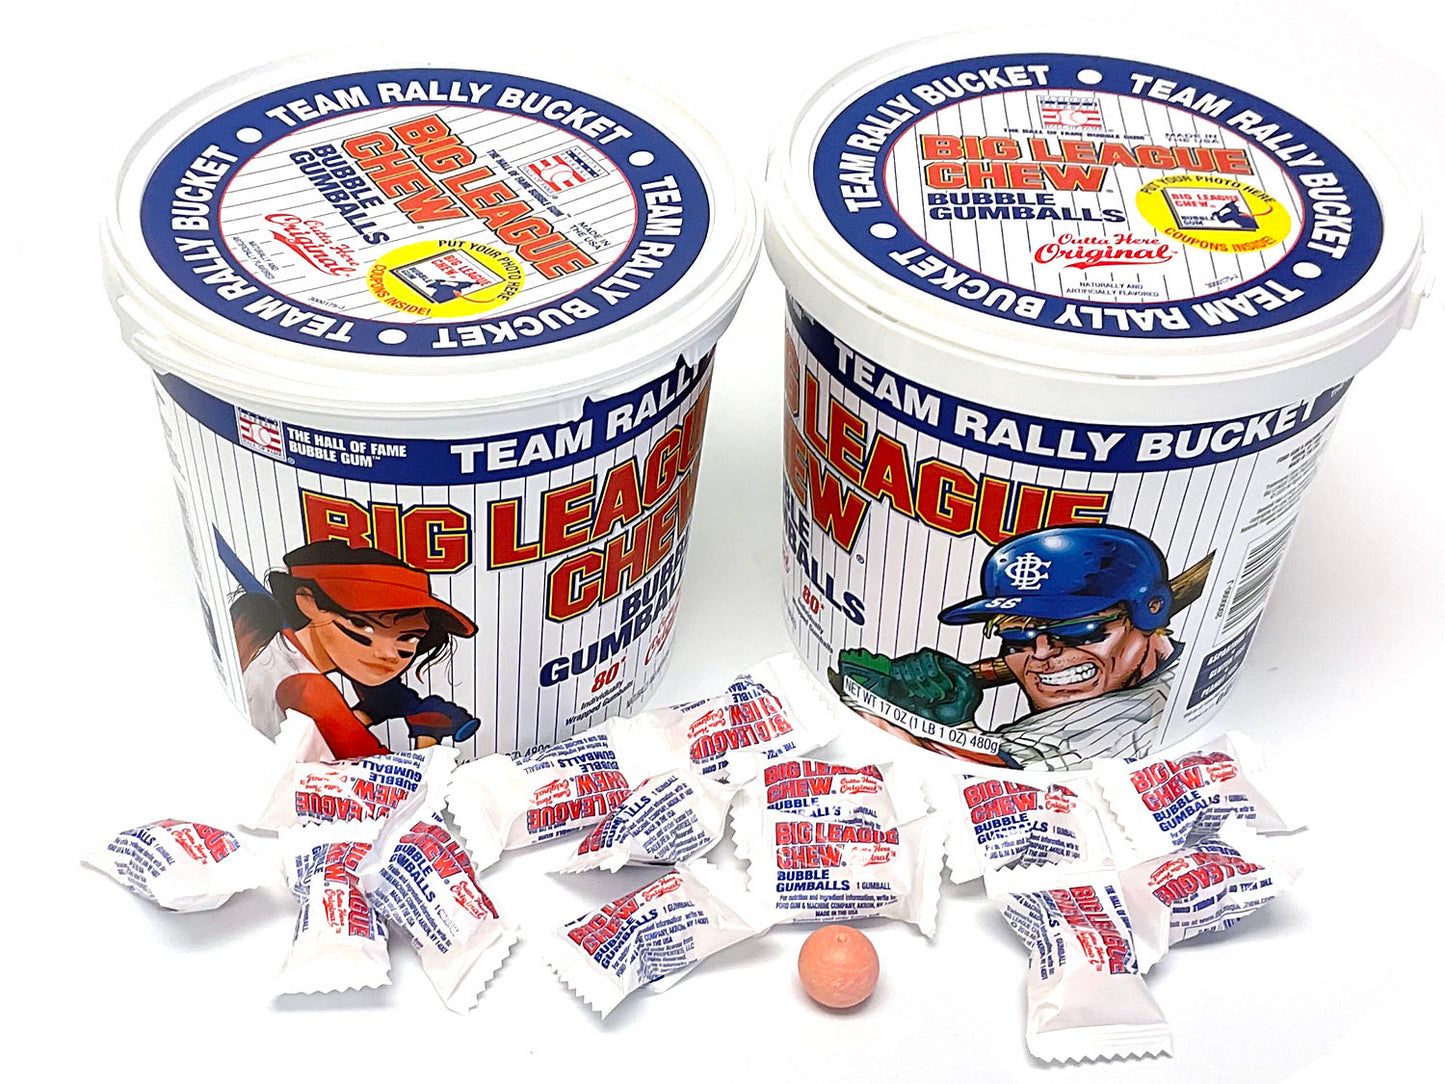 Big League Chew Bubble Gumball - Team Buckets front and back